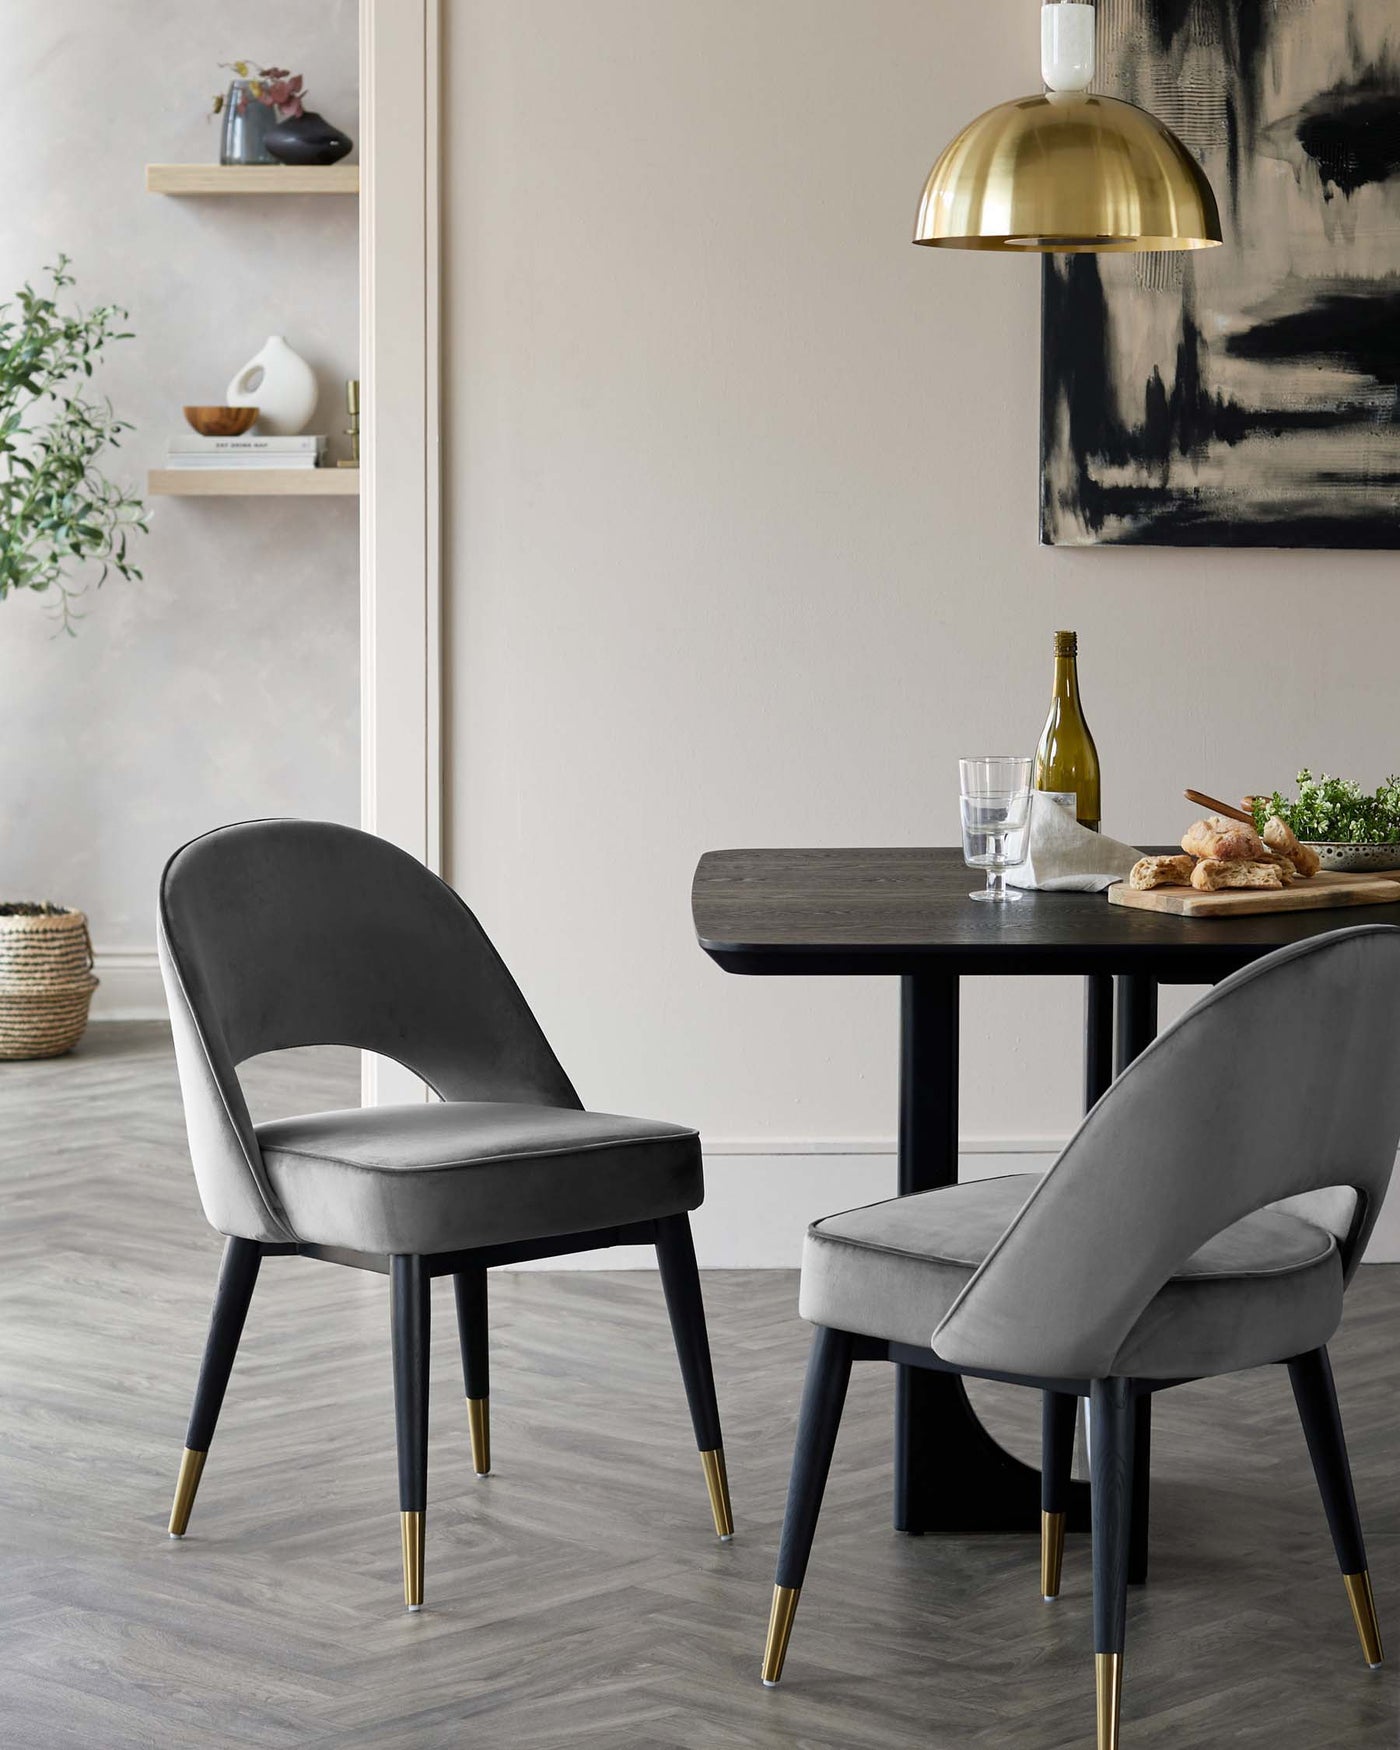 Elegant dining set featuring a rectangular black wooden table with a smooth finish and slim legs, paired with two plush velvet-upholstered chairs with a curved backrest, showcasing a sleek modern design in a grey tone with contrasting black legs tipped with brass accents.